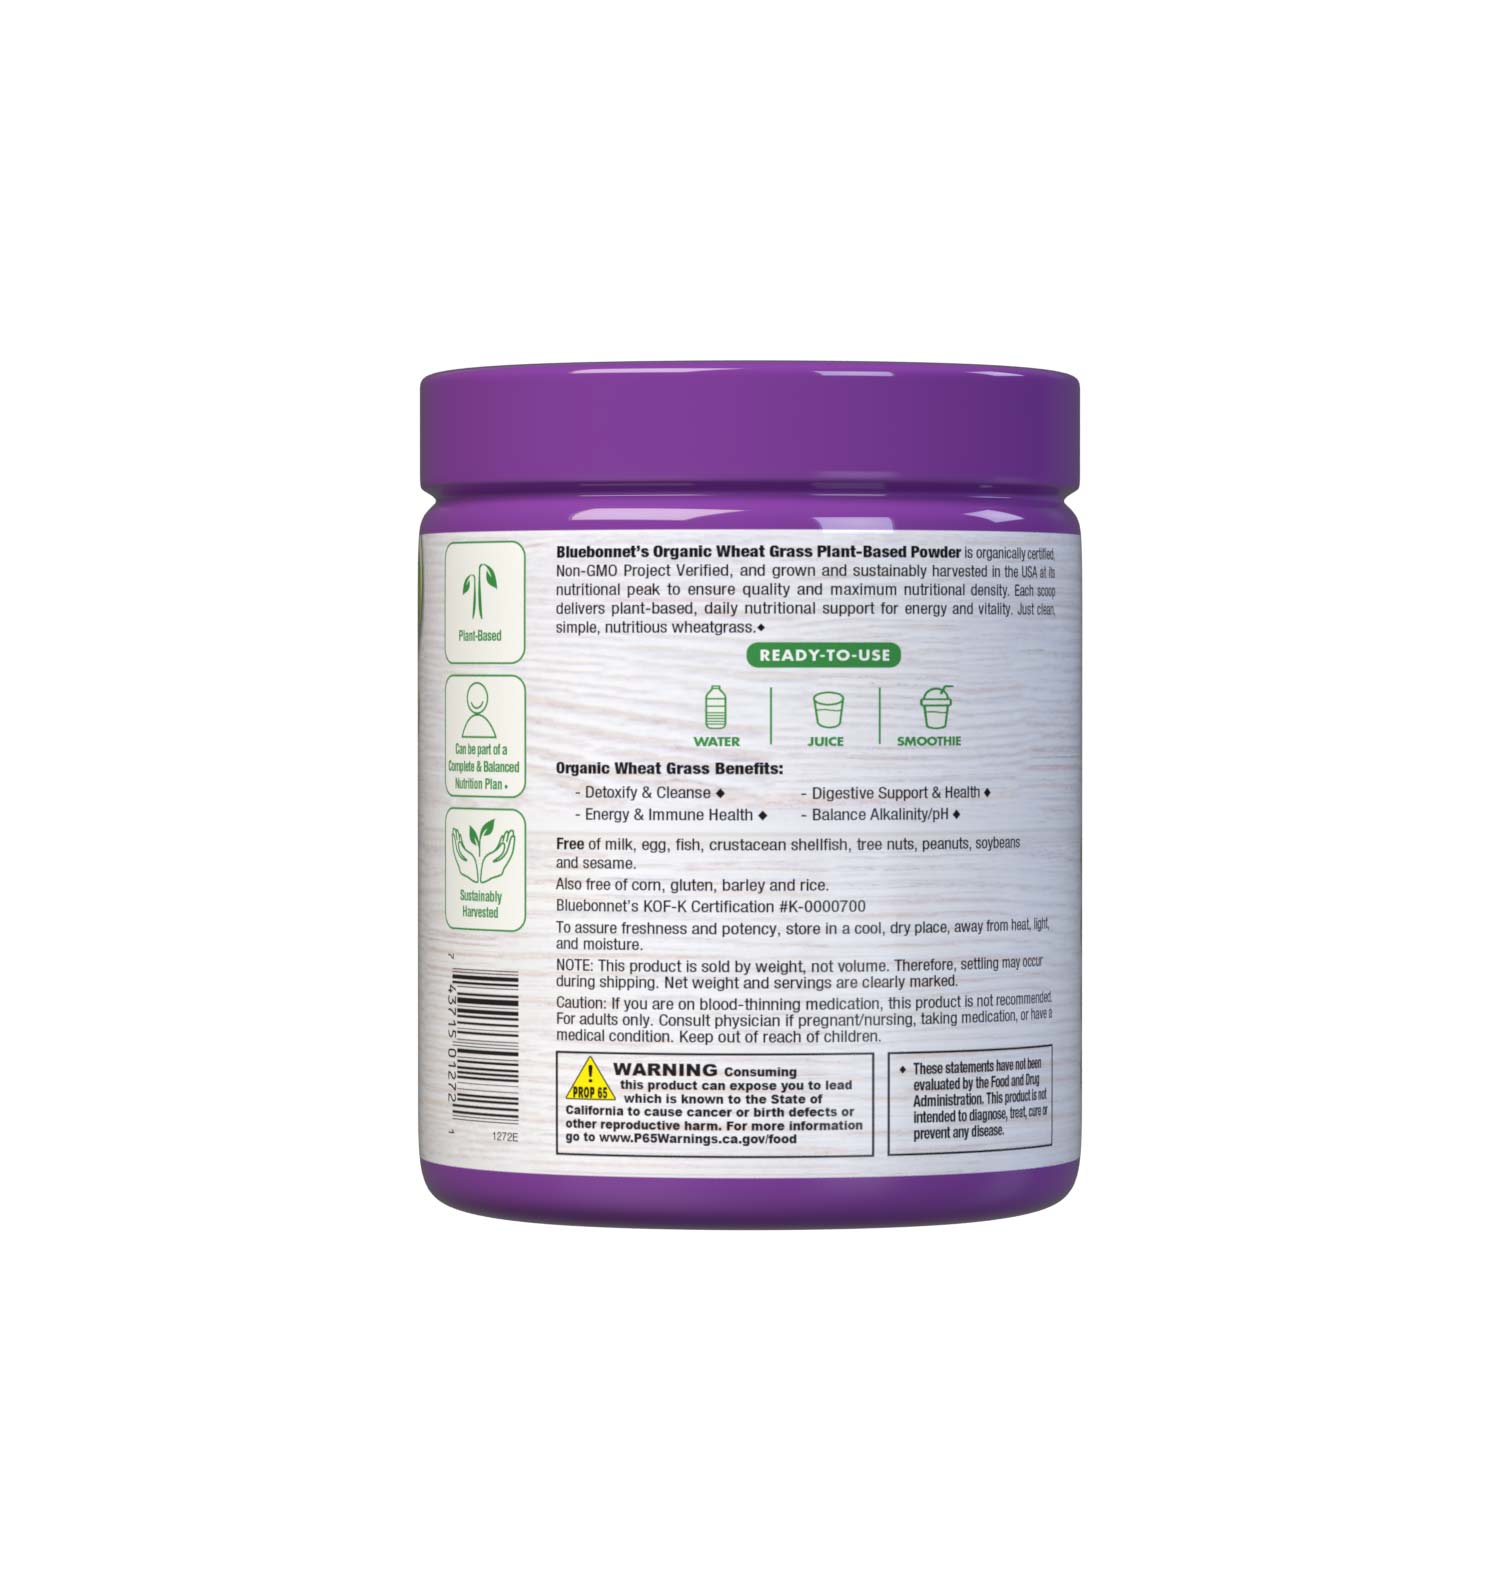 Bluebonnet’s Organic WheatGrass Powder provides 100% organic certified and non-GMO verified wheatgrass with no added sweeteners, flavors or colors. Description panel. #size_5.6oz